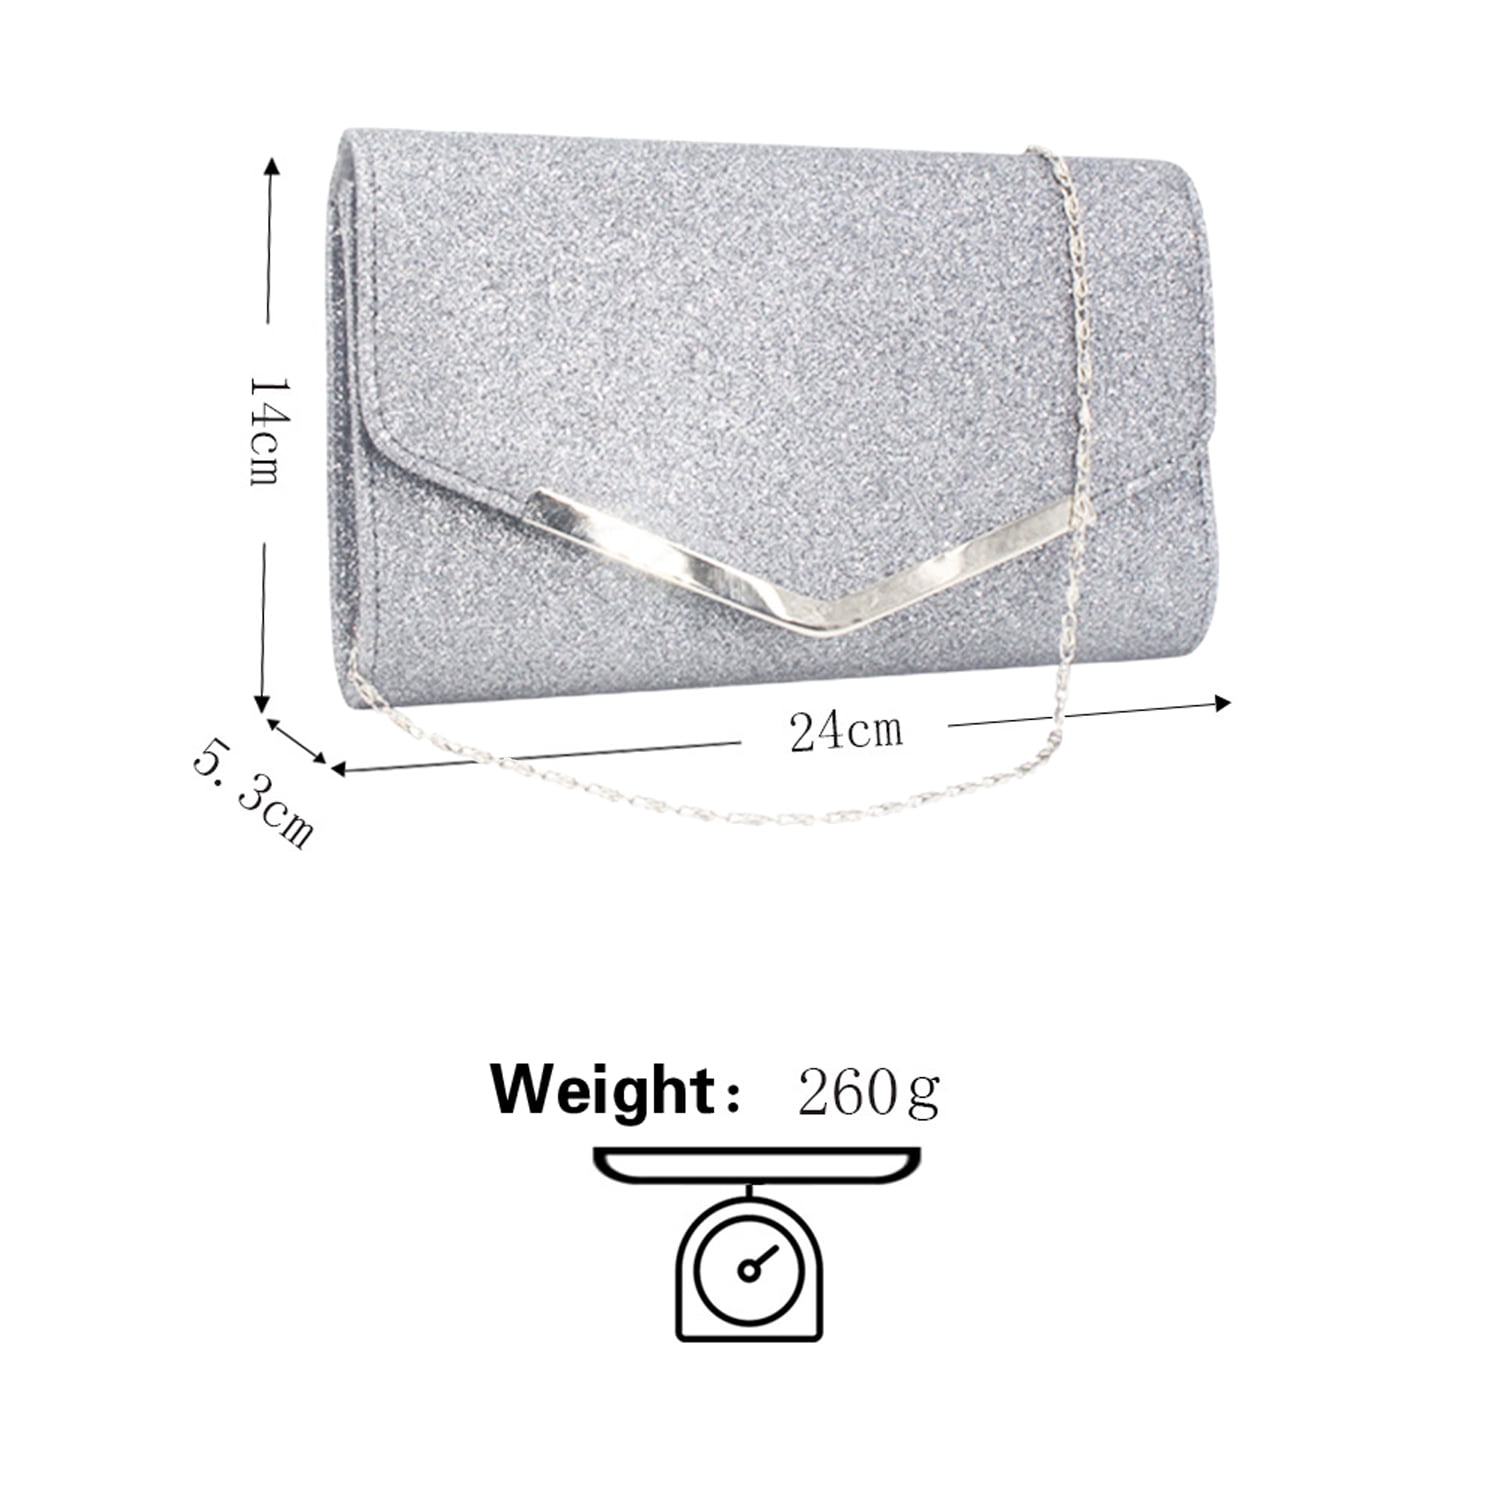 AVAVOFO Evening Bags for Women Formal And Clutches, Round Prom Purse Mini Silver  Clutch Purse for Party: Handbags: Amazon.com